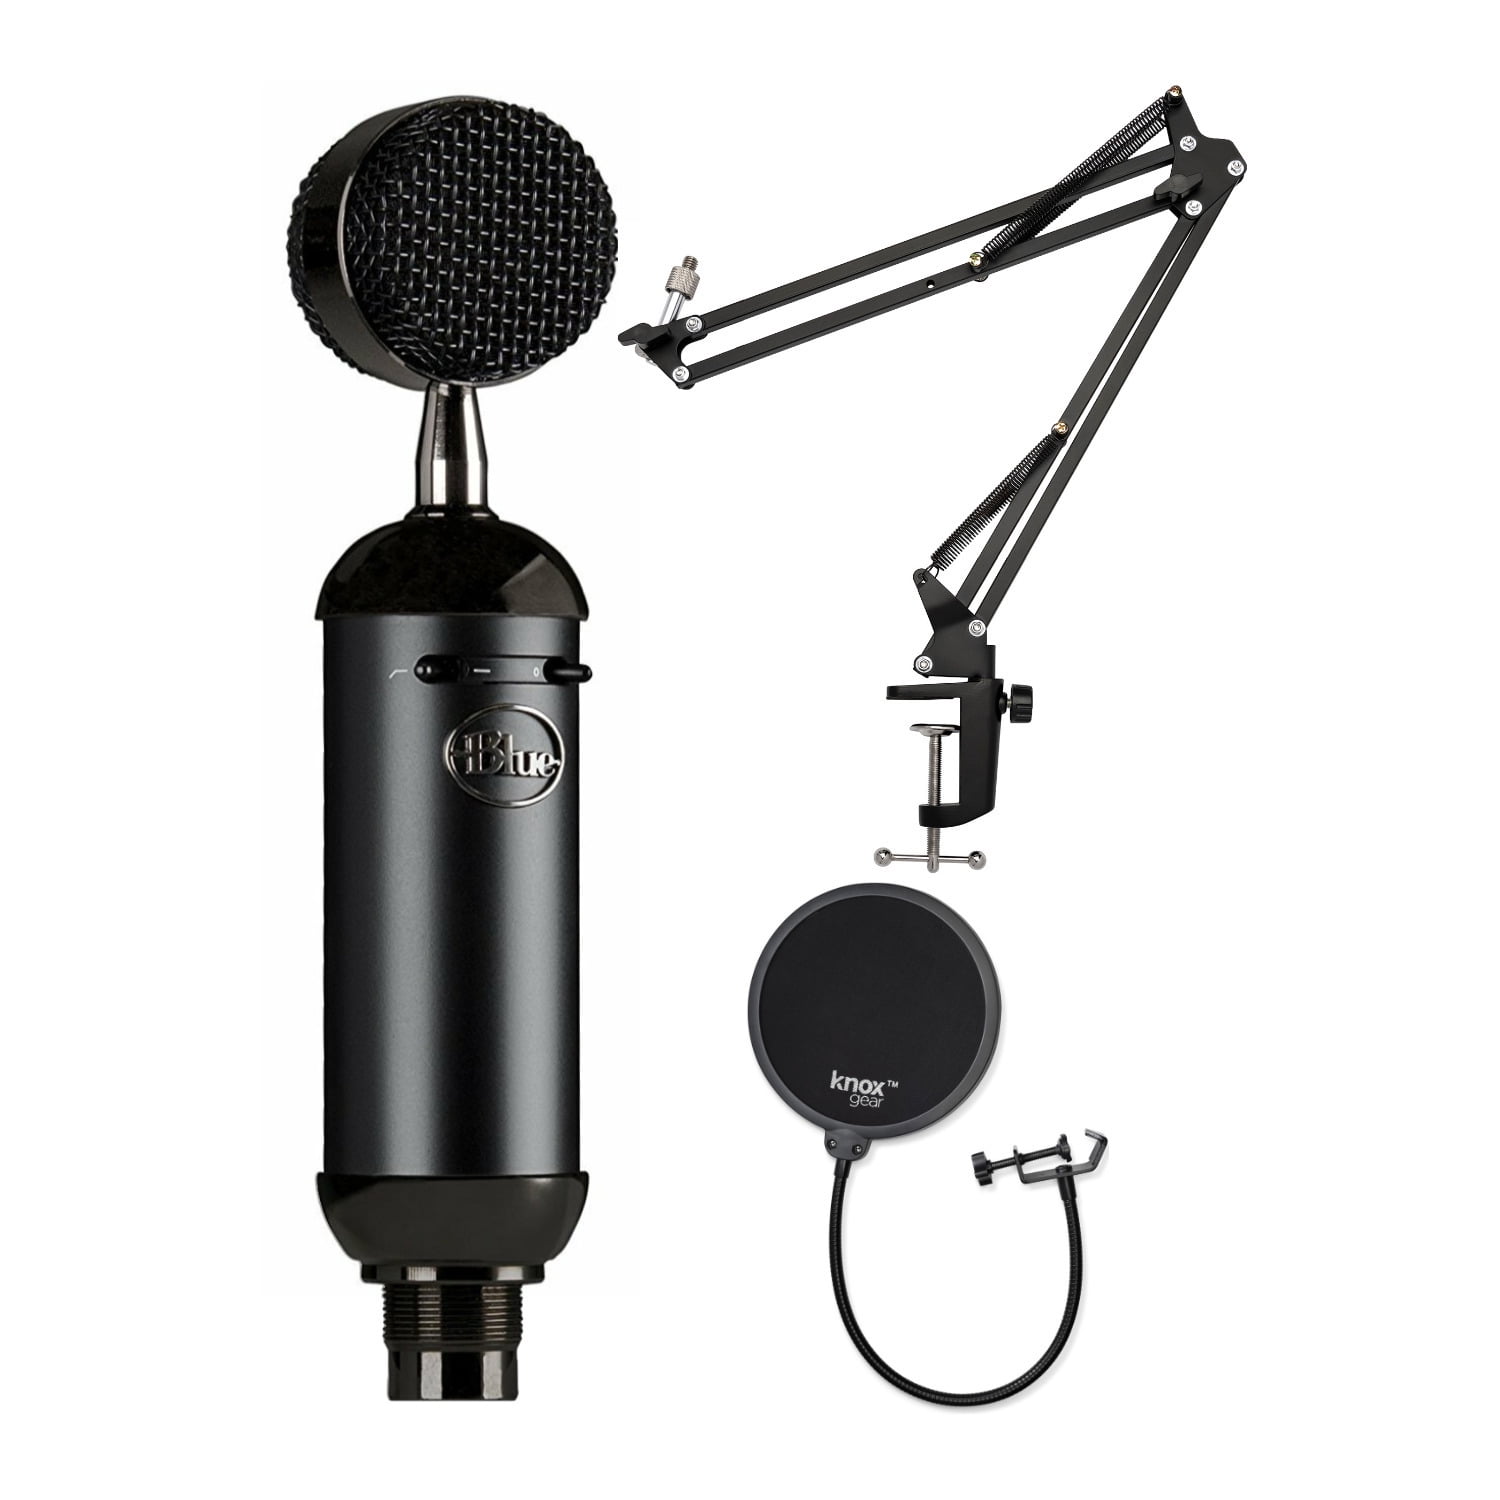 Blue Microphones Spark SL XLR Condenser Microphone with Accessory